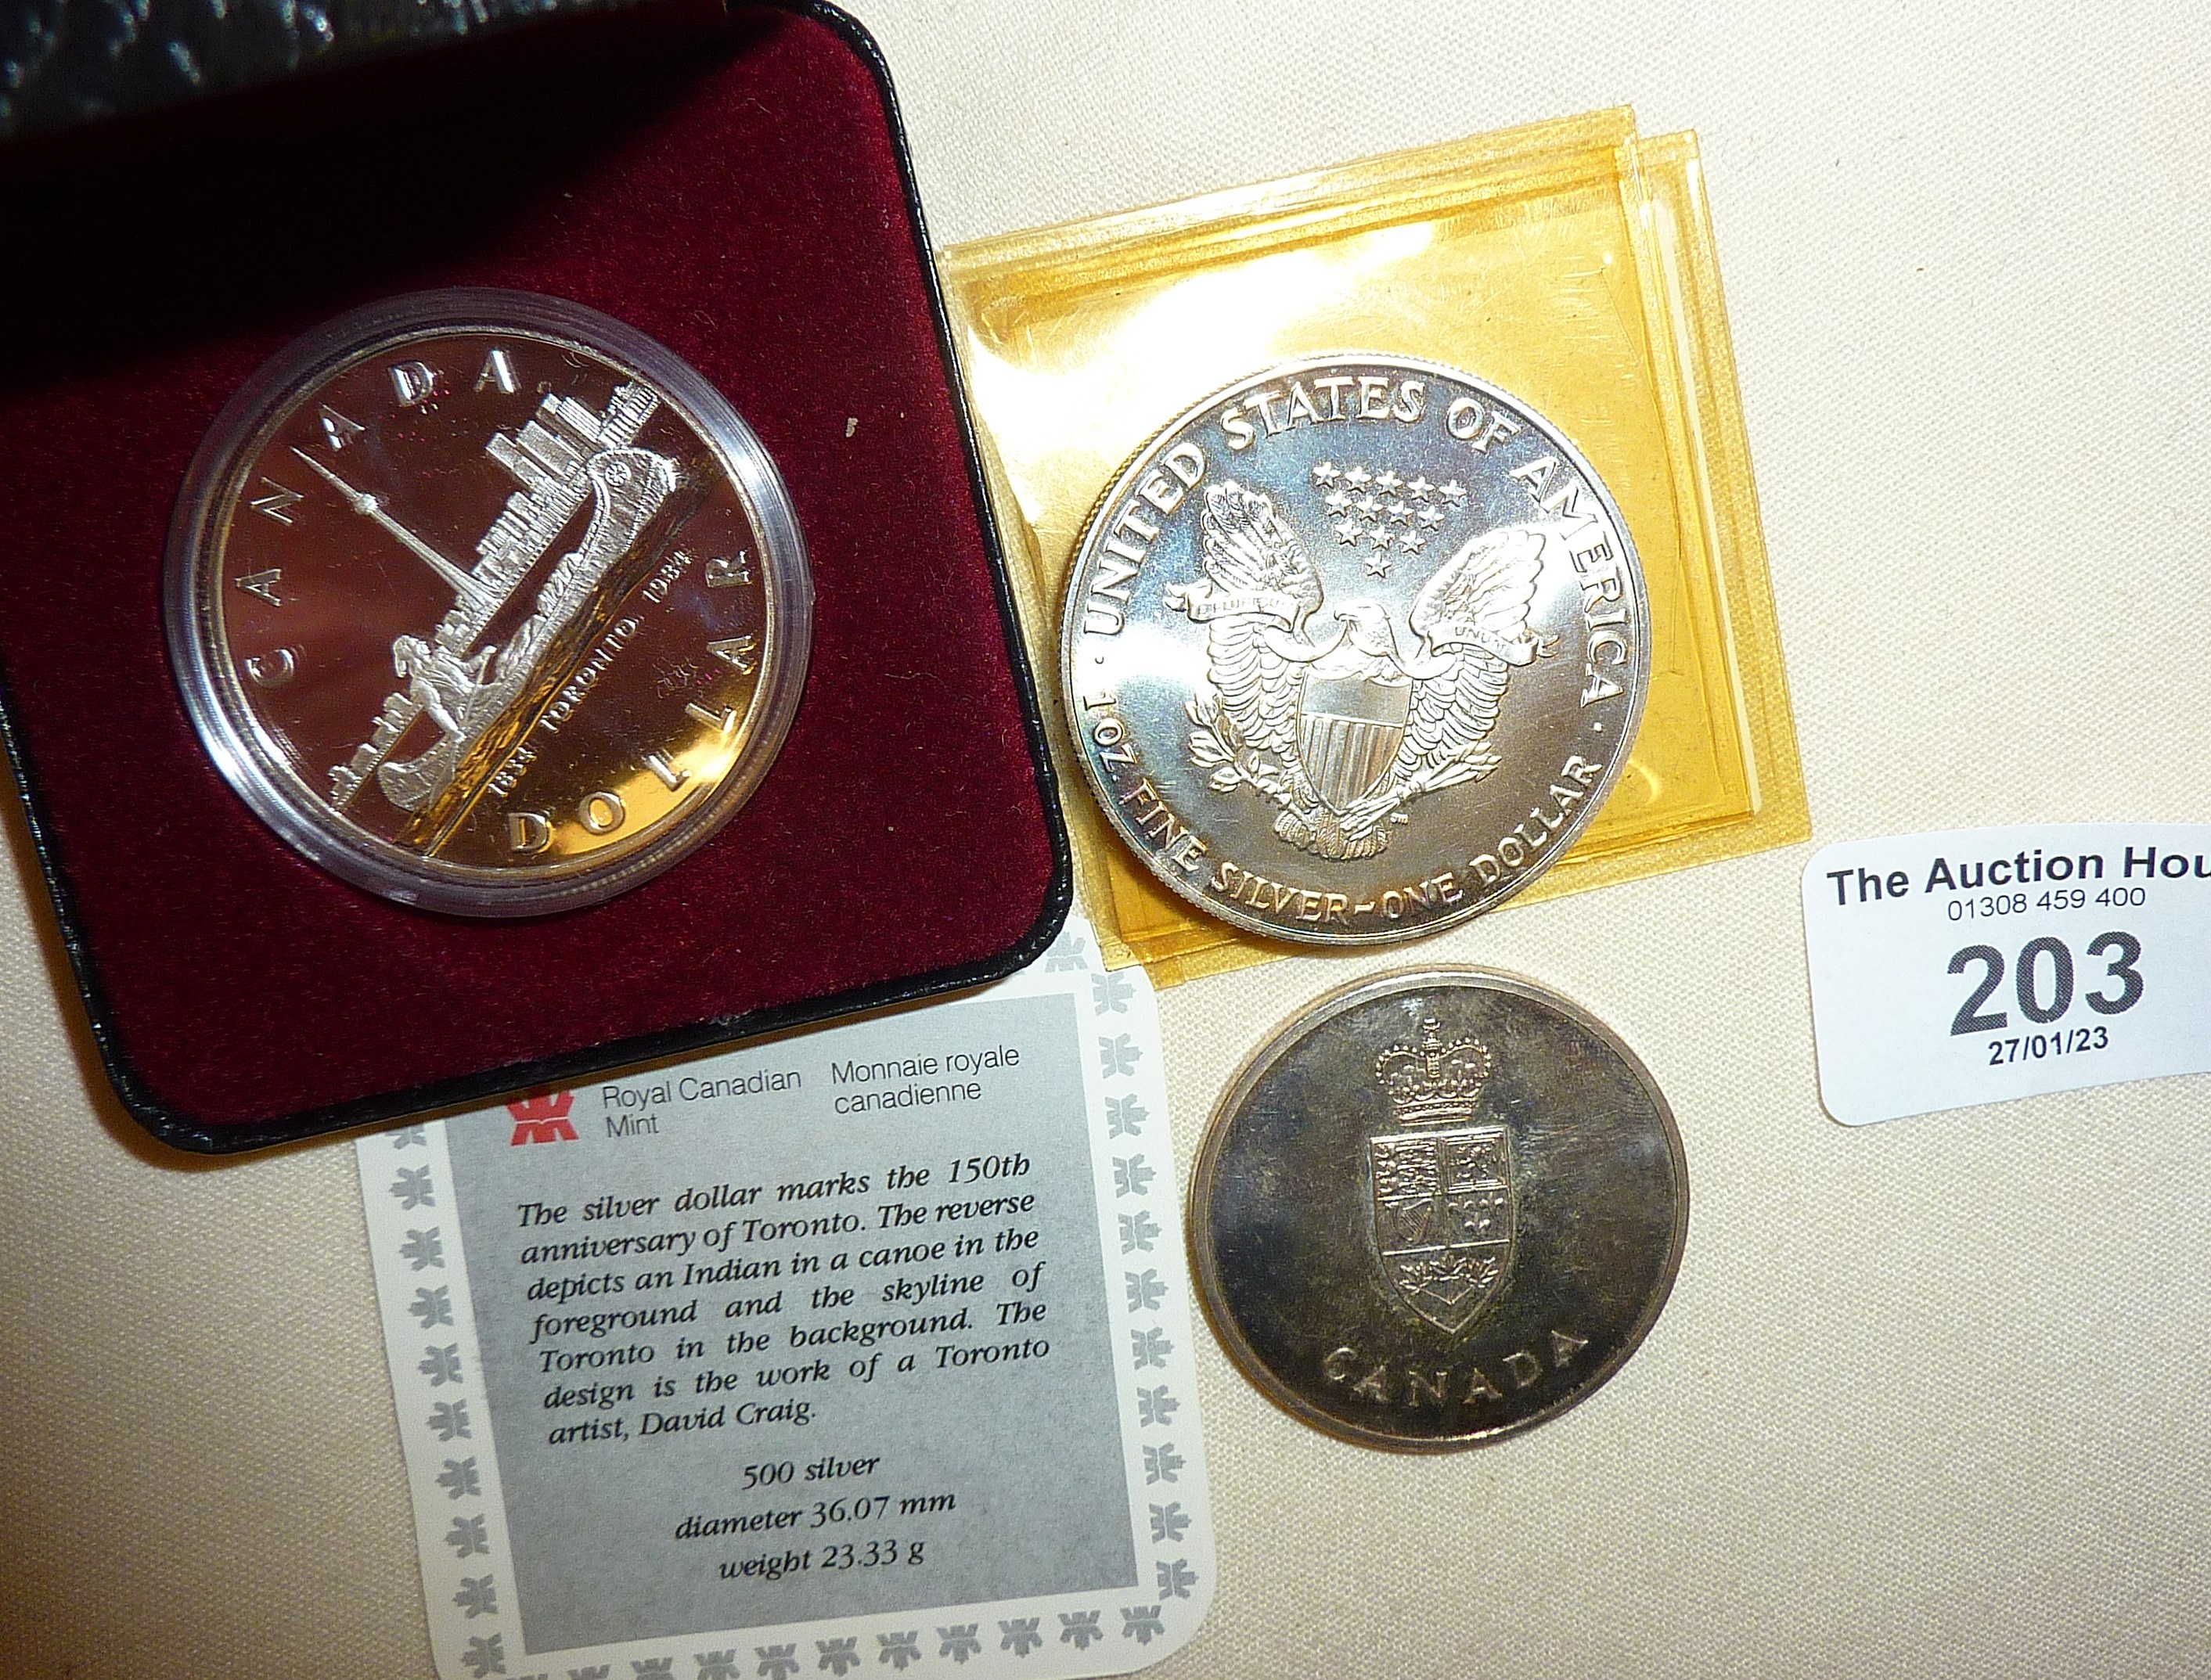 1984 commemorative 500 silver Canadian Dollar in case, 1992 USA silver Liberty dollar, and a 1967